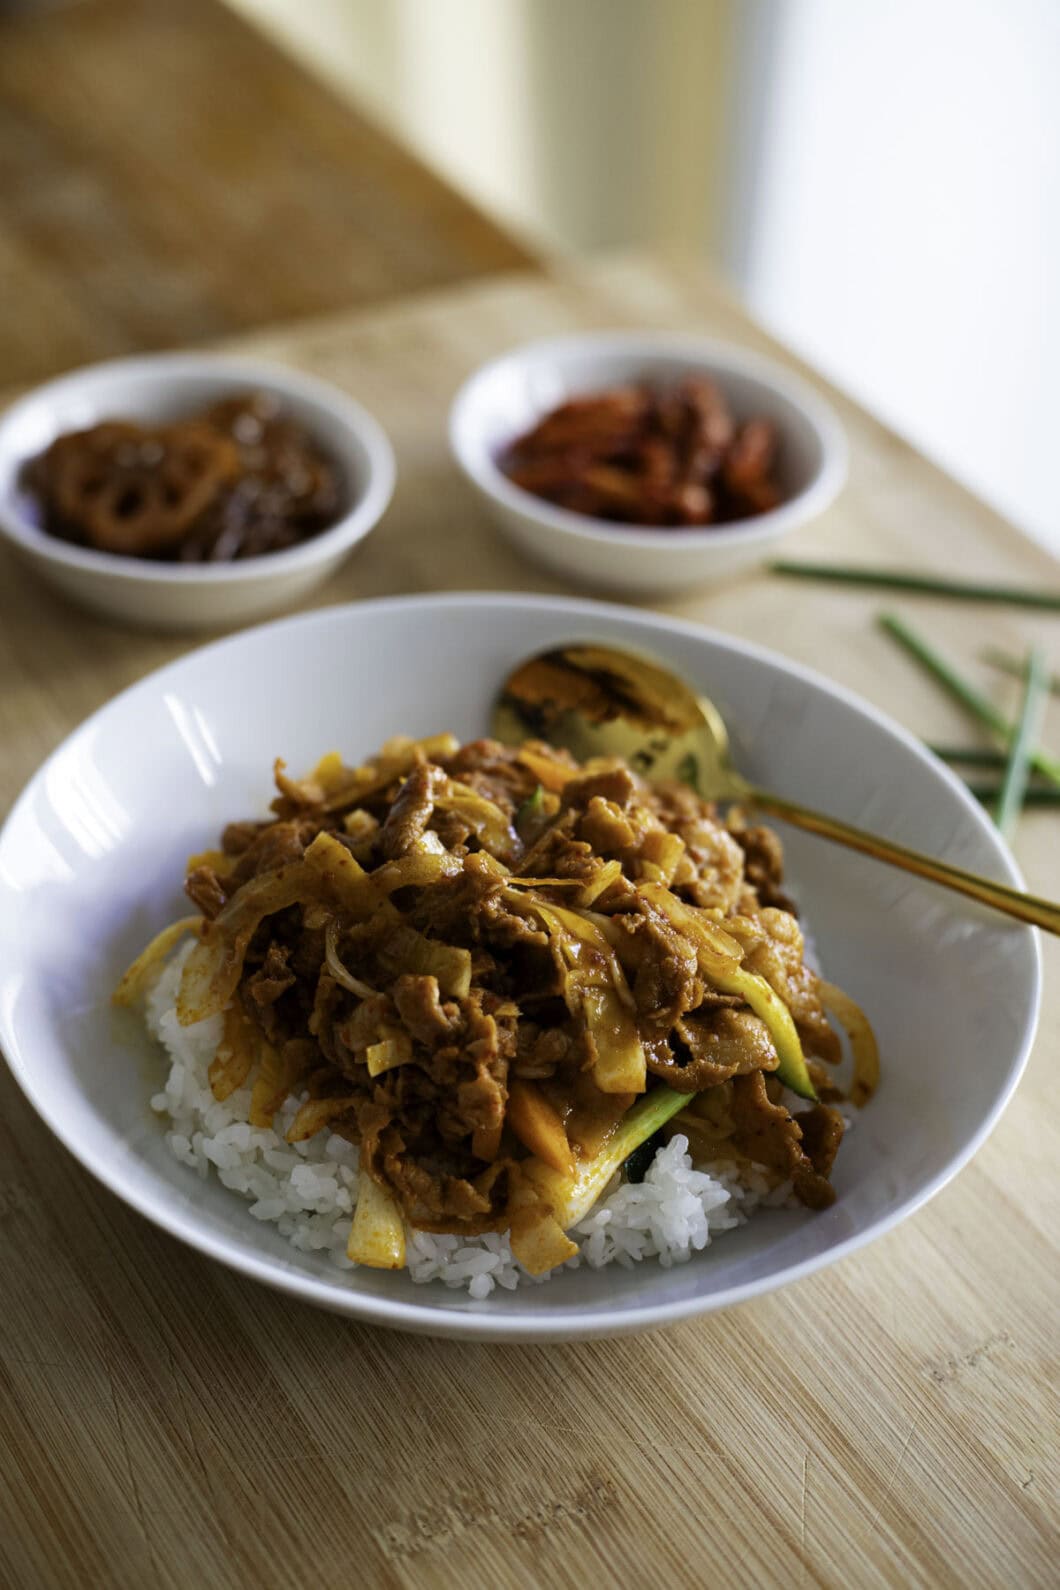 Spicy stir-fried pork with gochujang sauce over rice